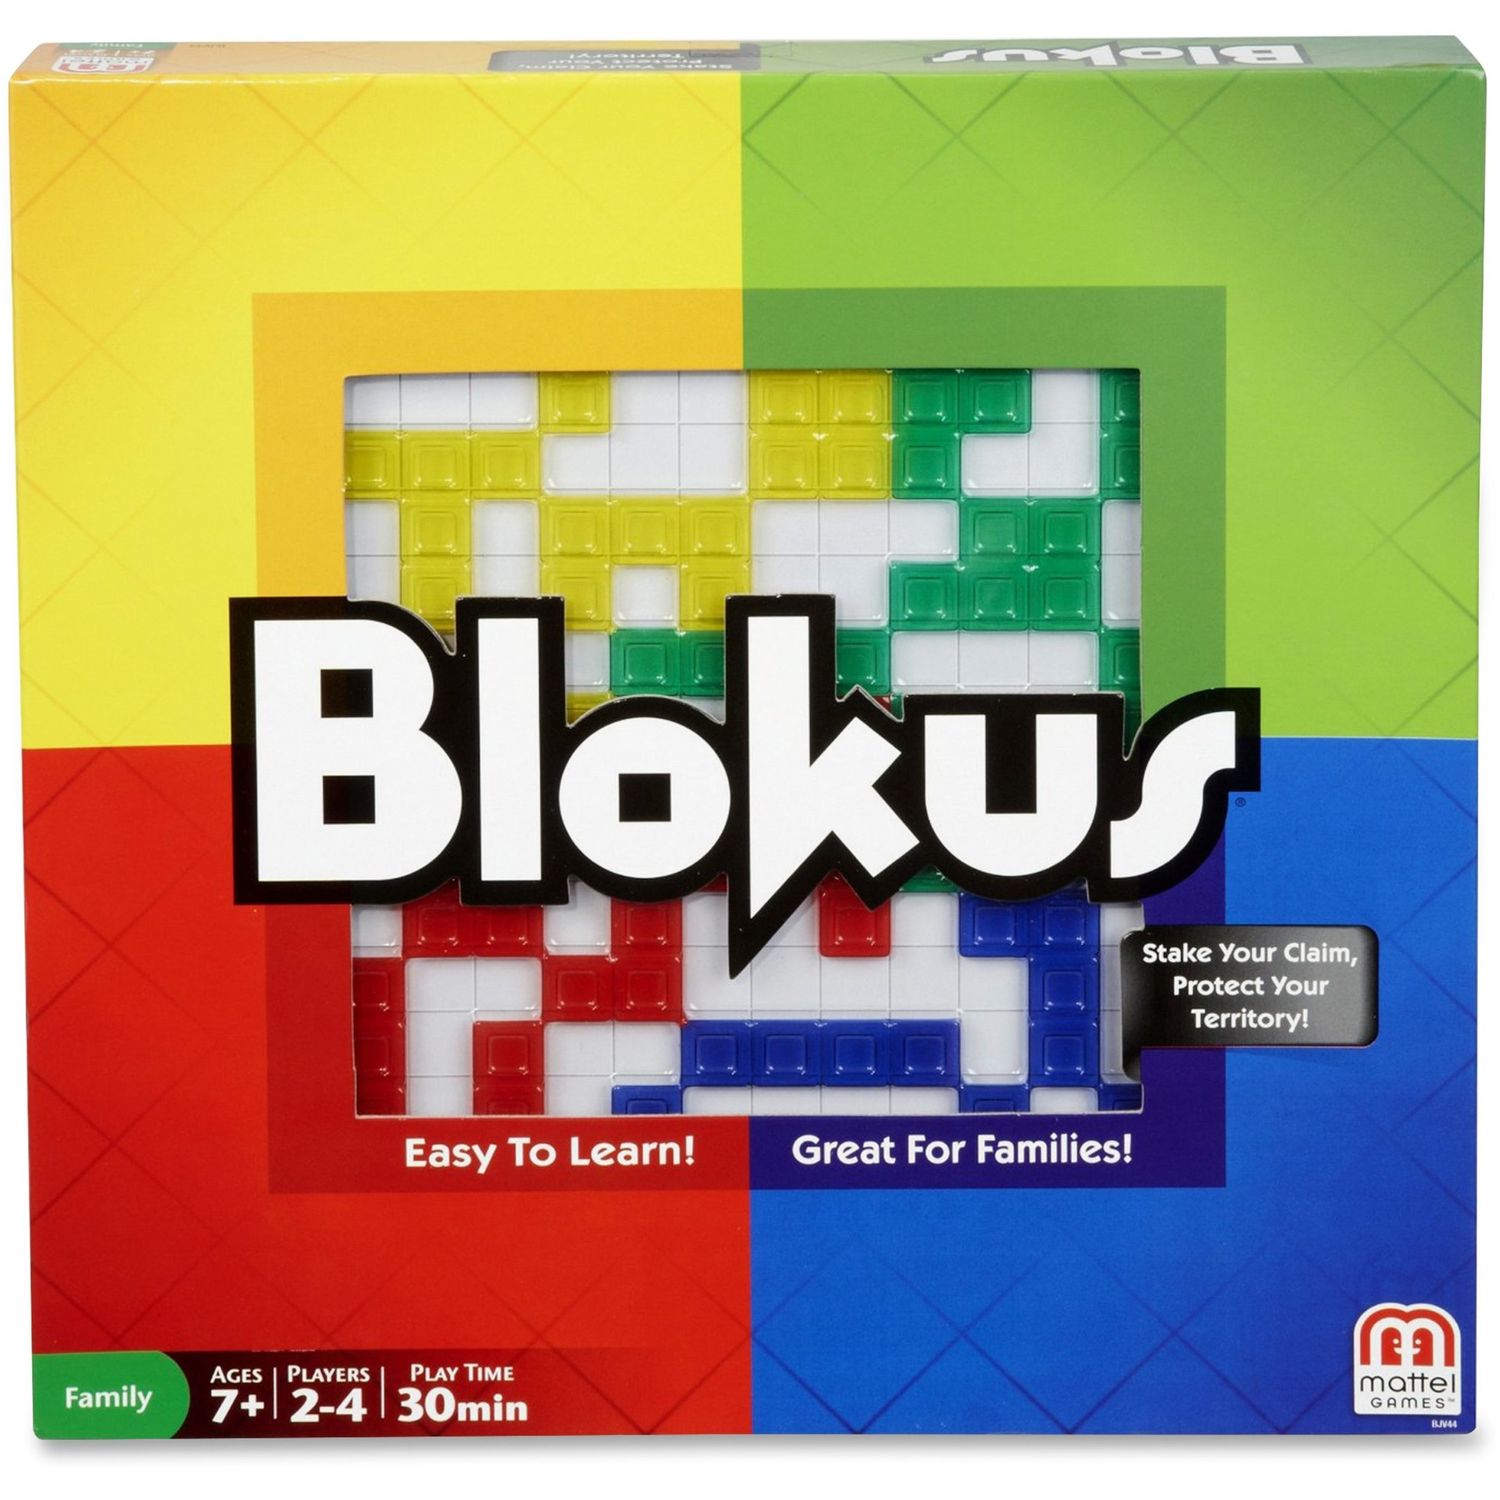 Blokus Game Takes Less Than 1 Minute to Learn, Endless Strategy, Fun Challenges, For Whole Family